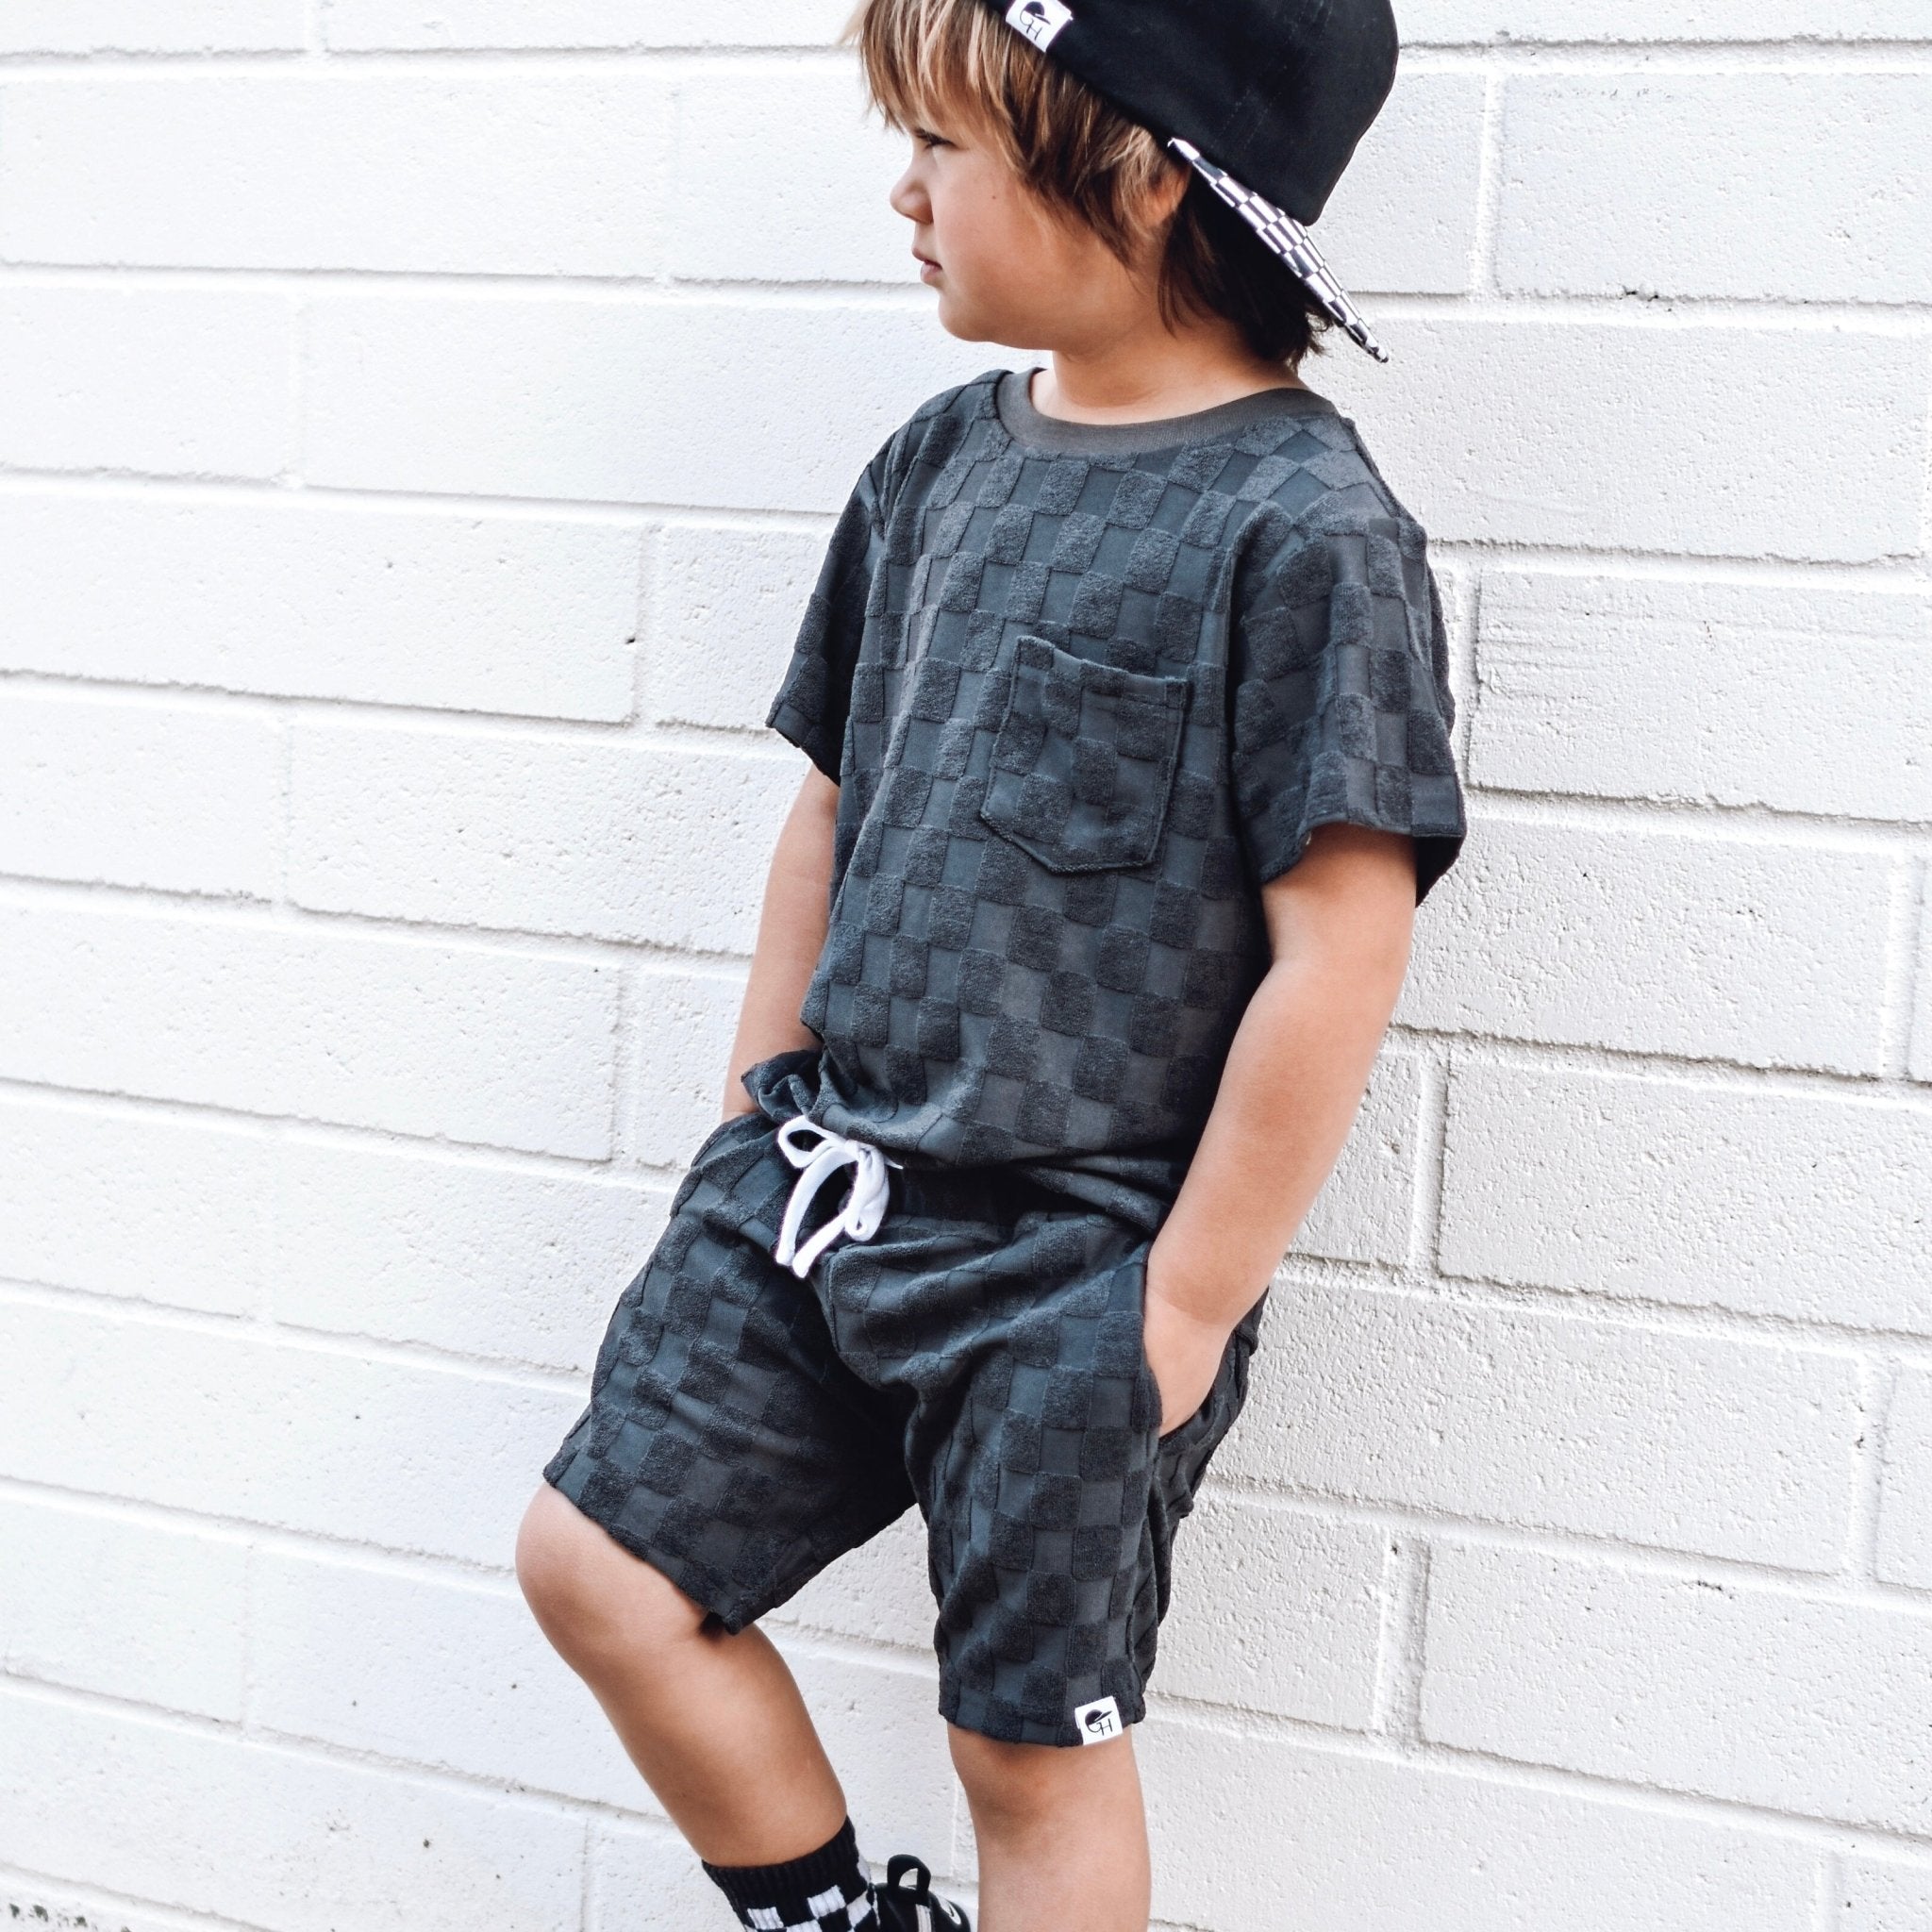 Charcoal Check Terry Pocket Tee - George Hats